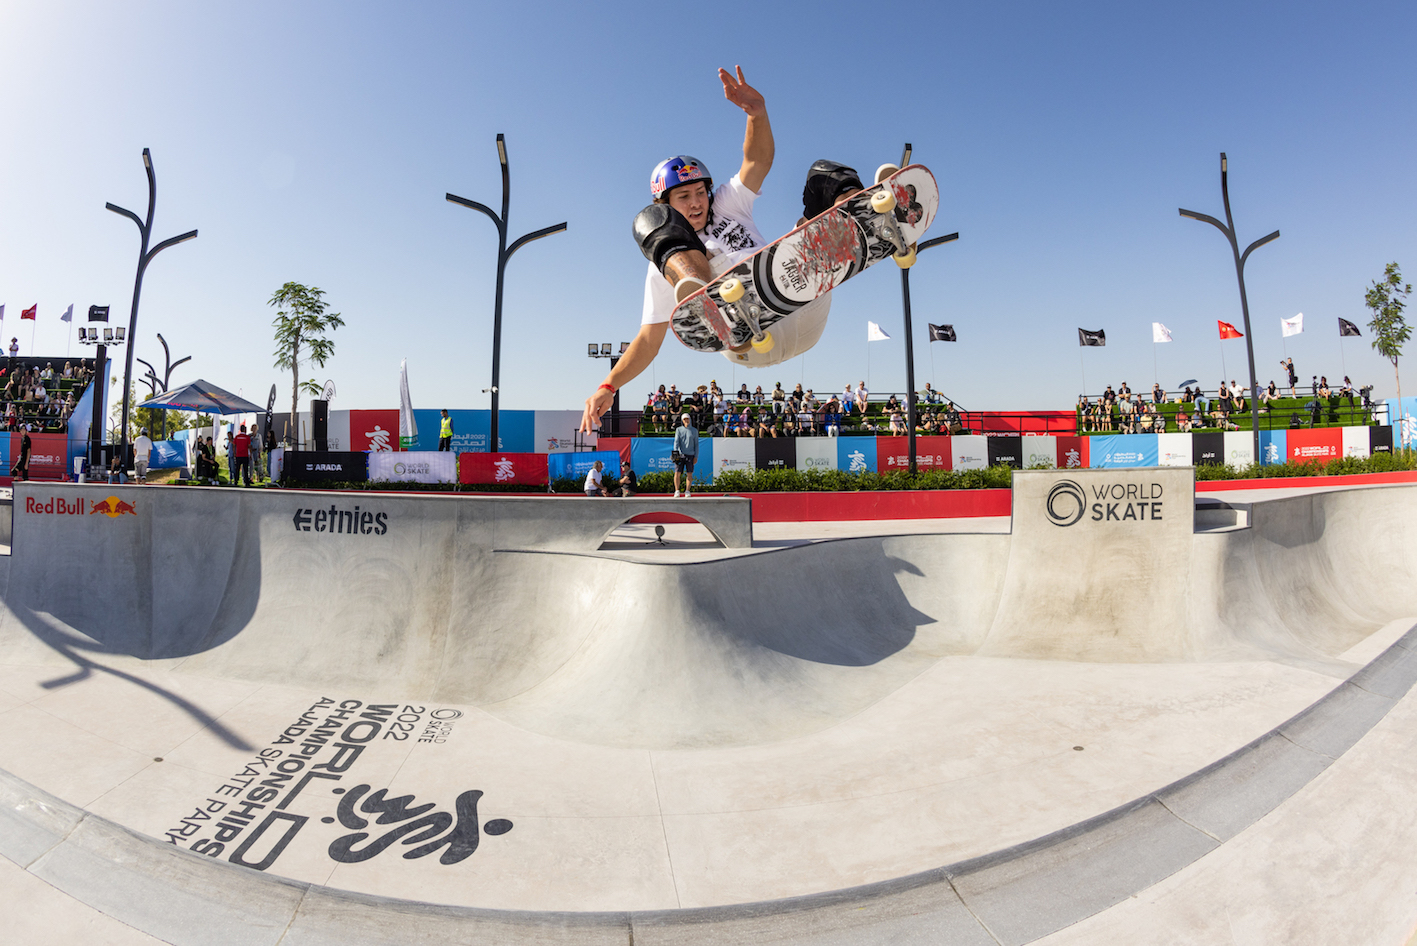 images/WST_SHARJAH_REVIEW_FEATURE/jagger-eaton-ollie-fakie.jpg